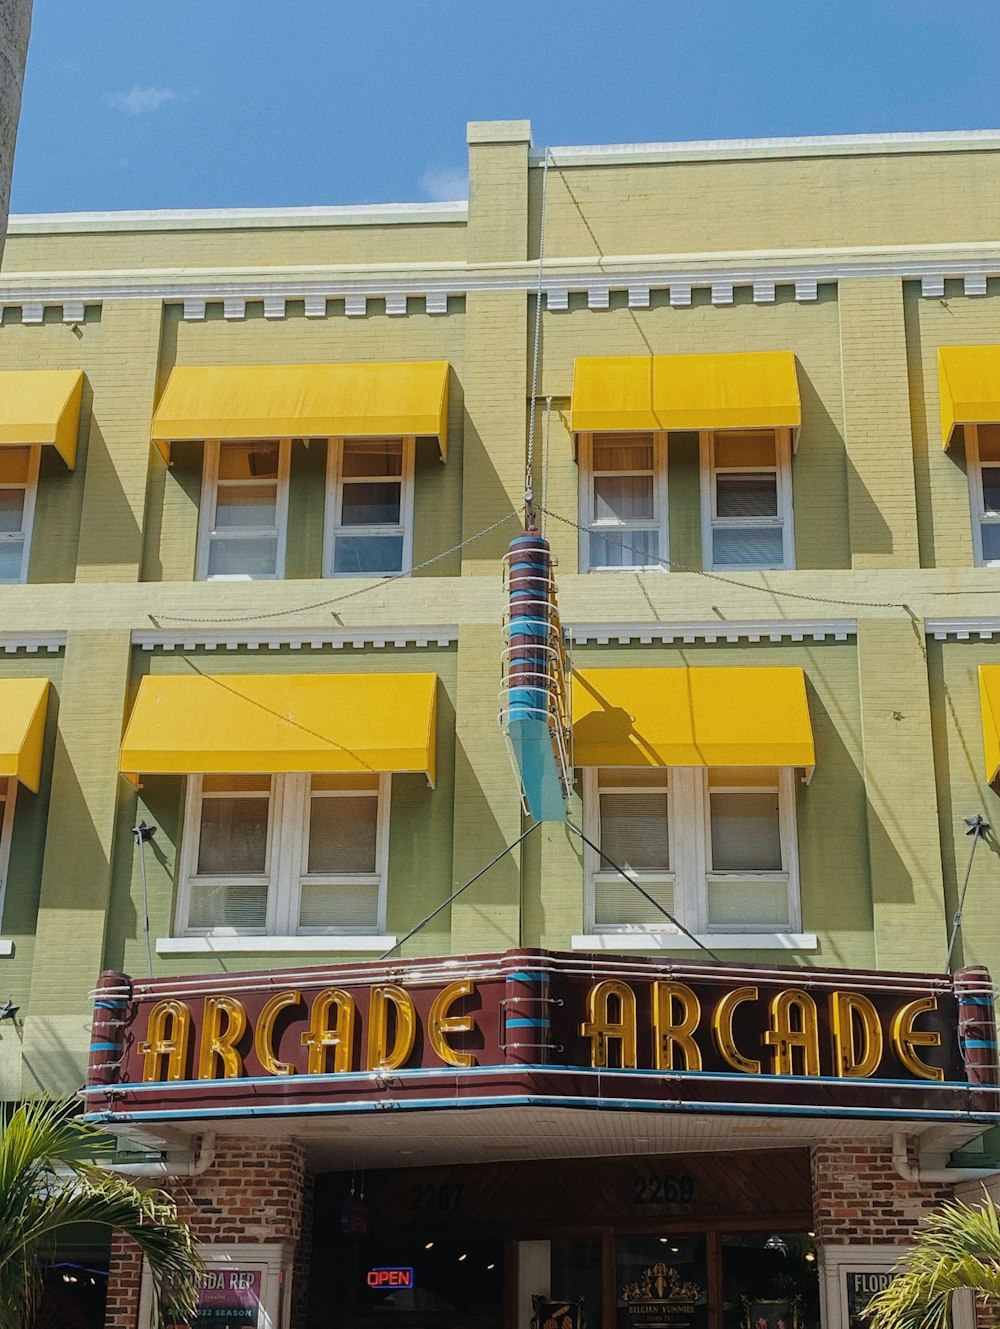 a building with a sign that says arcade arcade